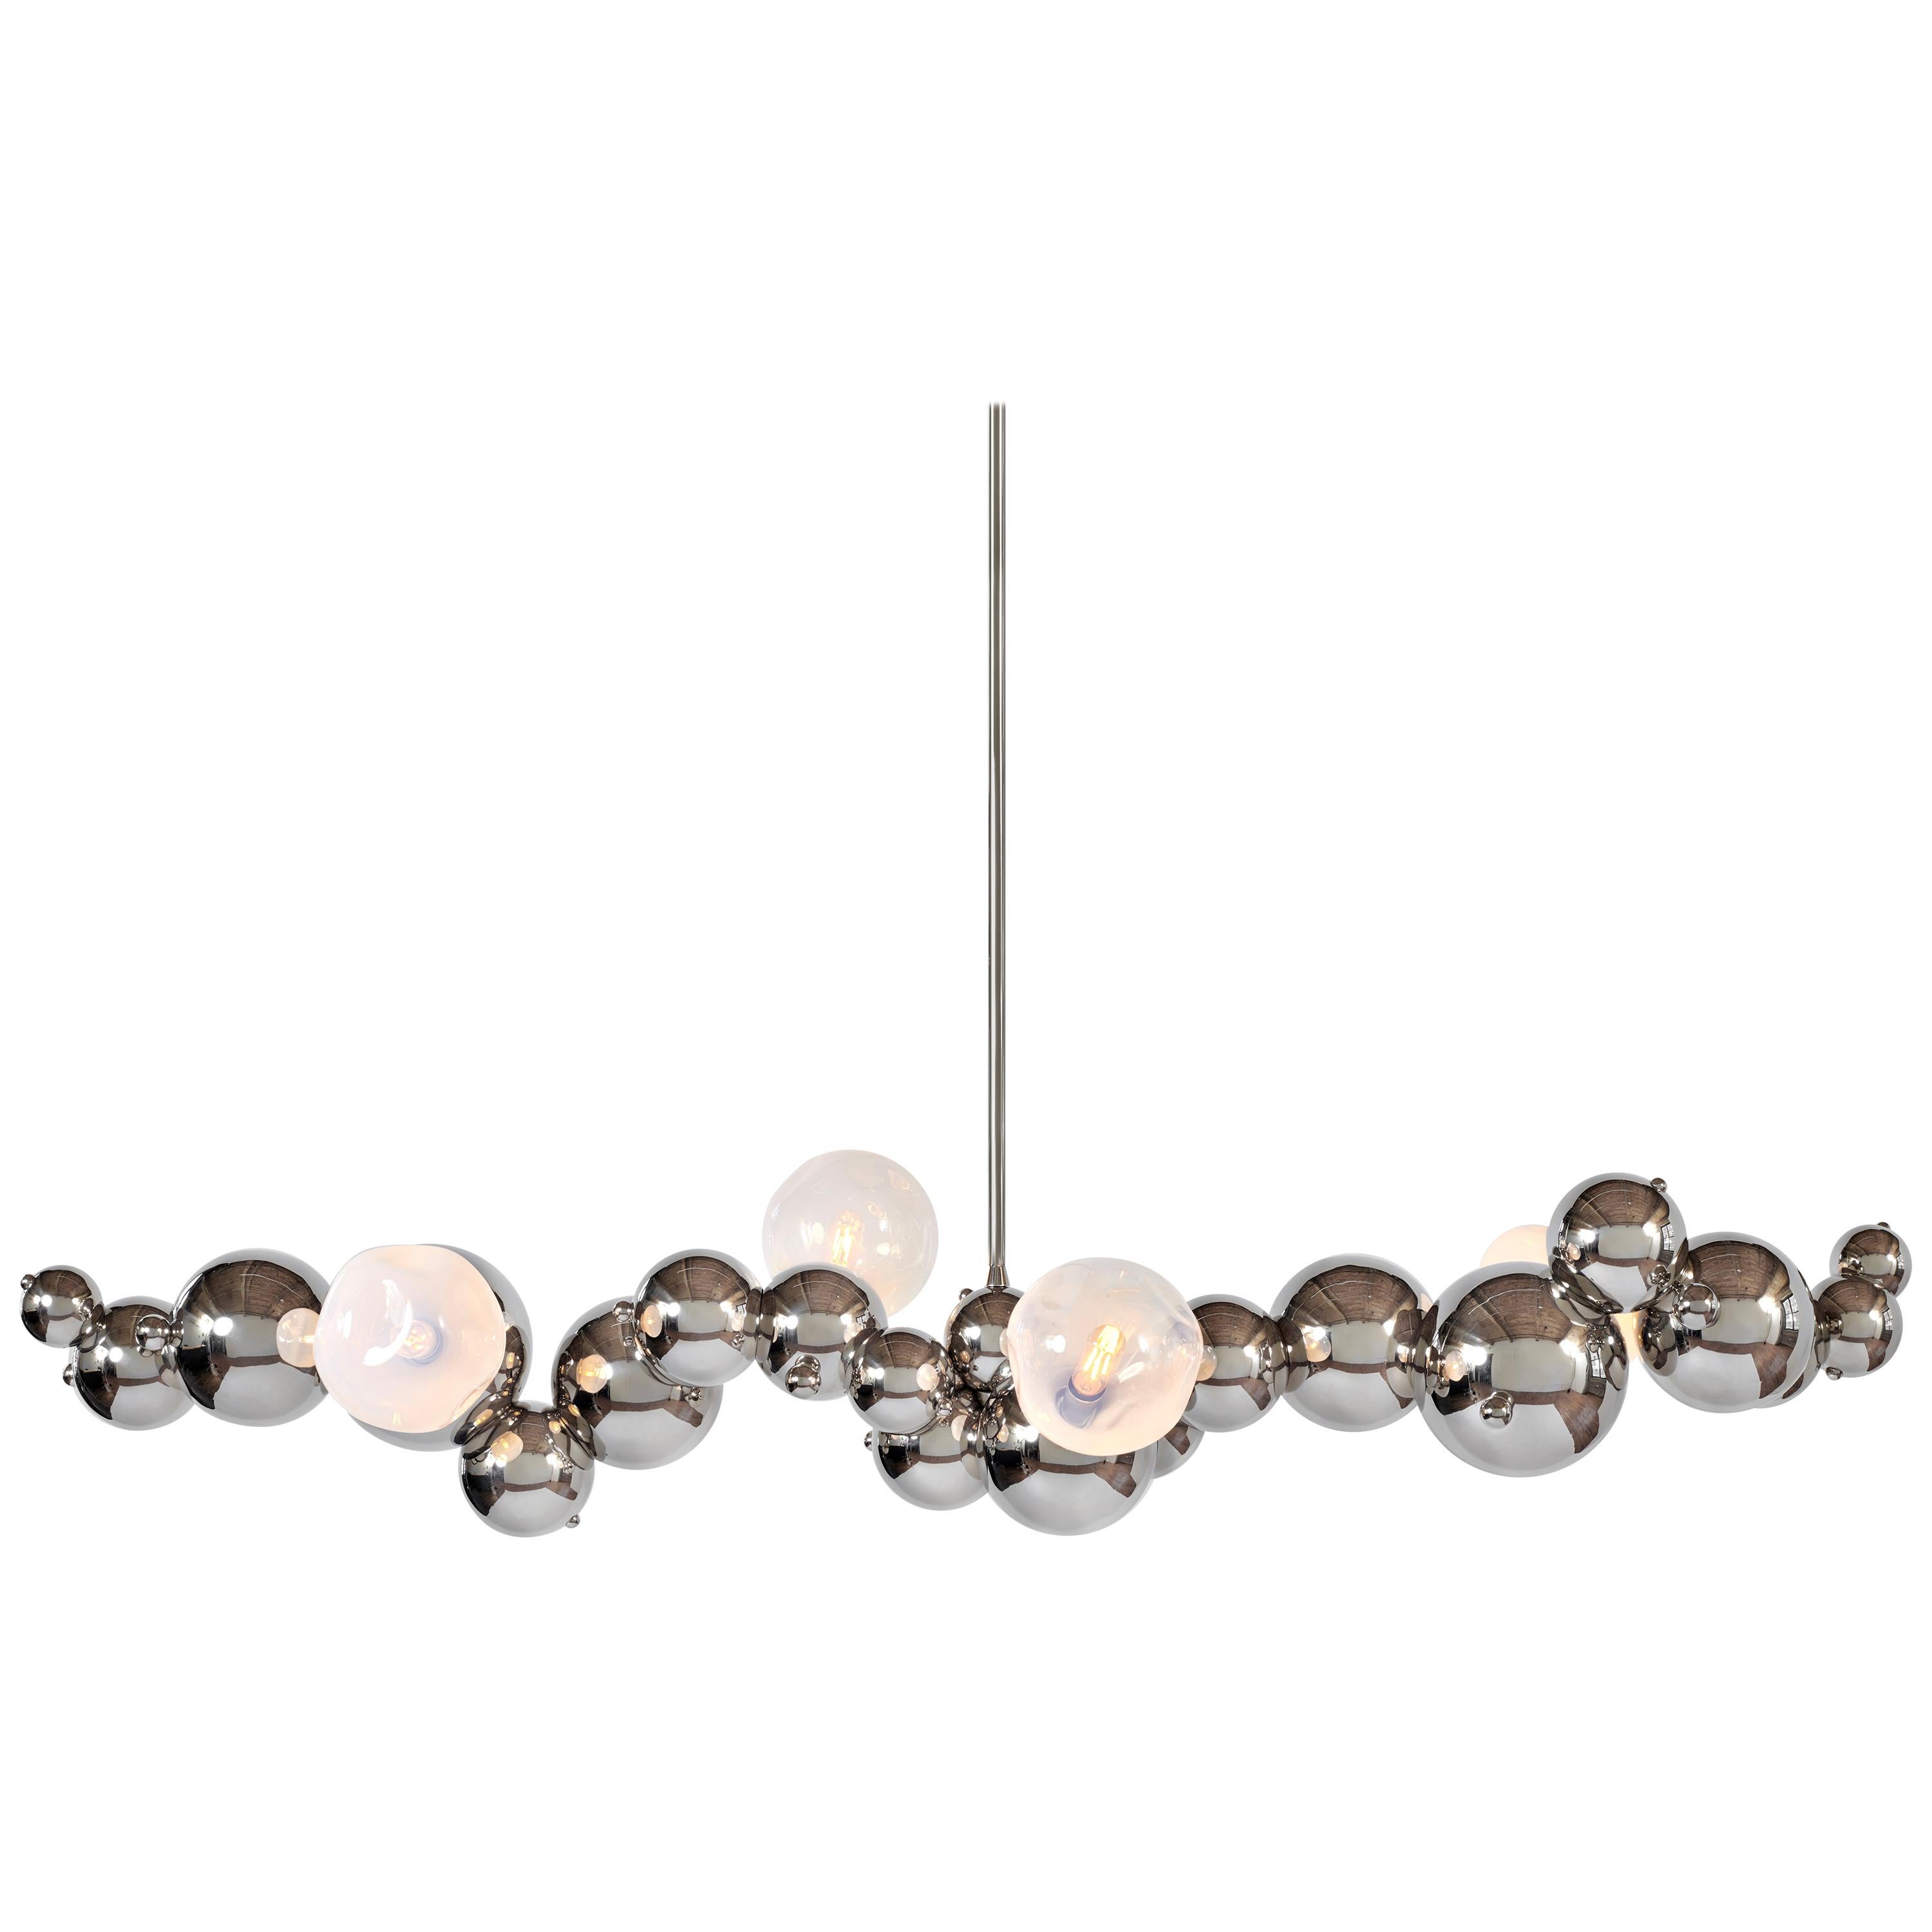 Large Organic "Bubbly" Linear Chandelier in Polished Nickel with Opal Glass